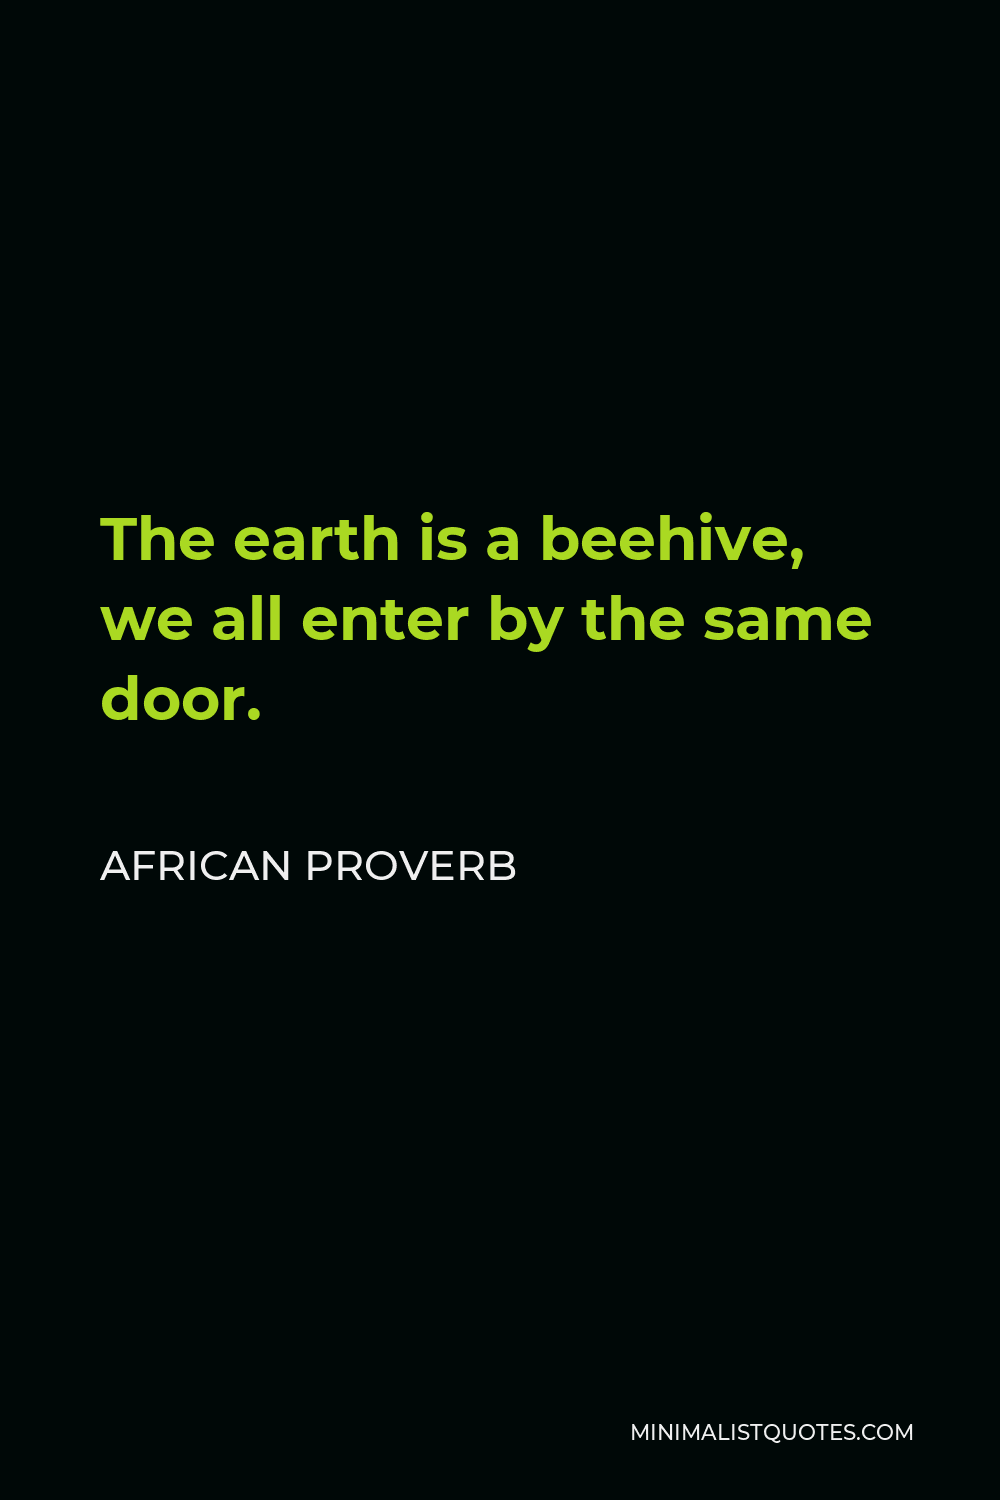 African Proverb Quote - The earth is a beehive, we all enter by the same door.